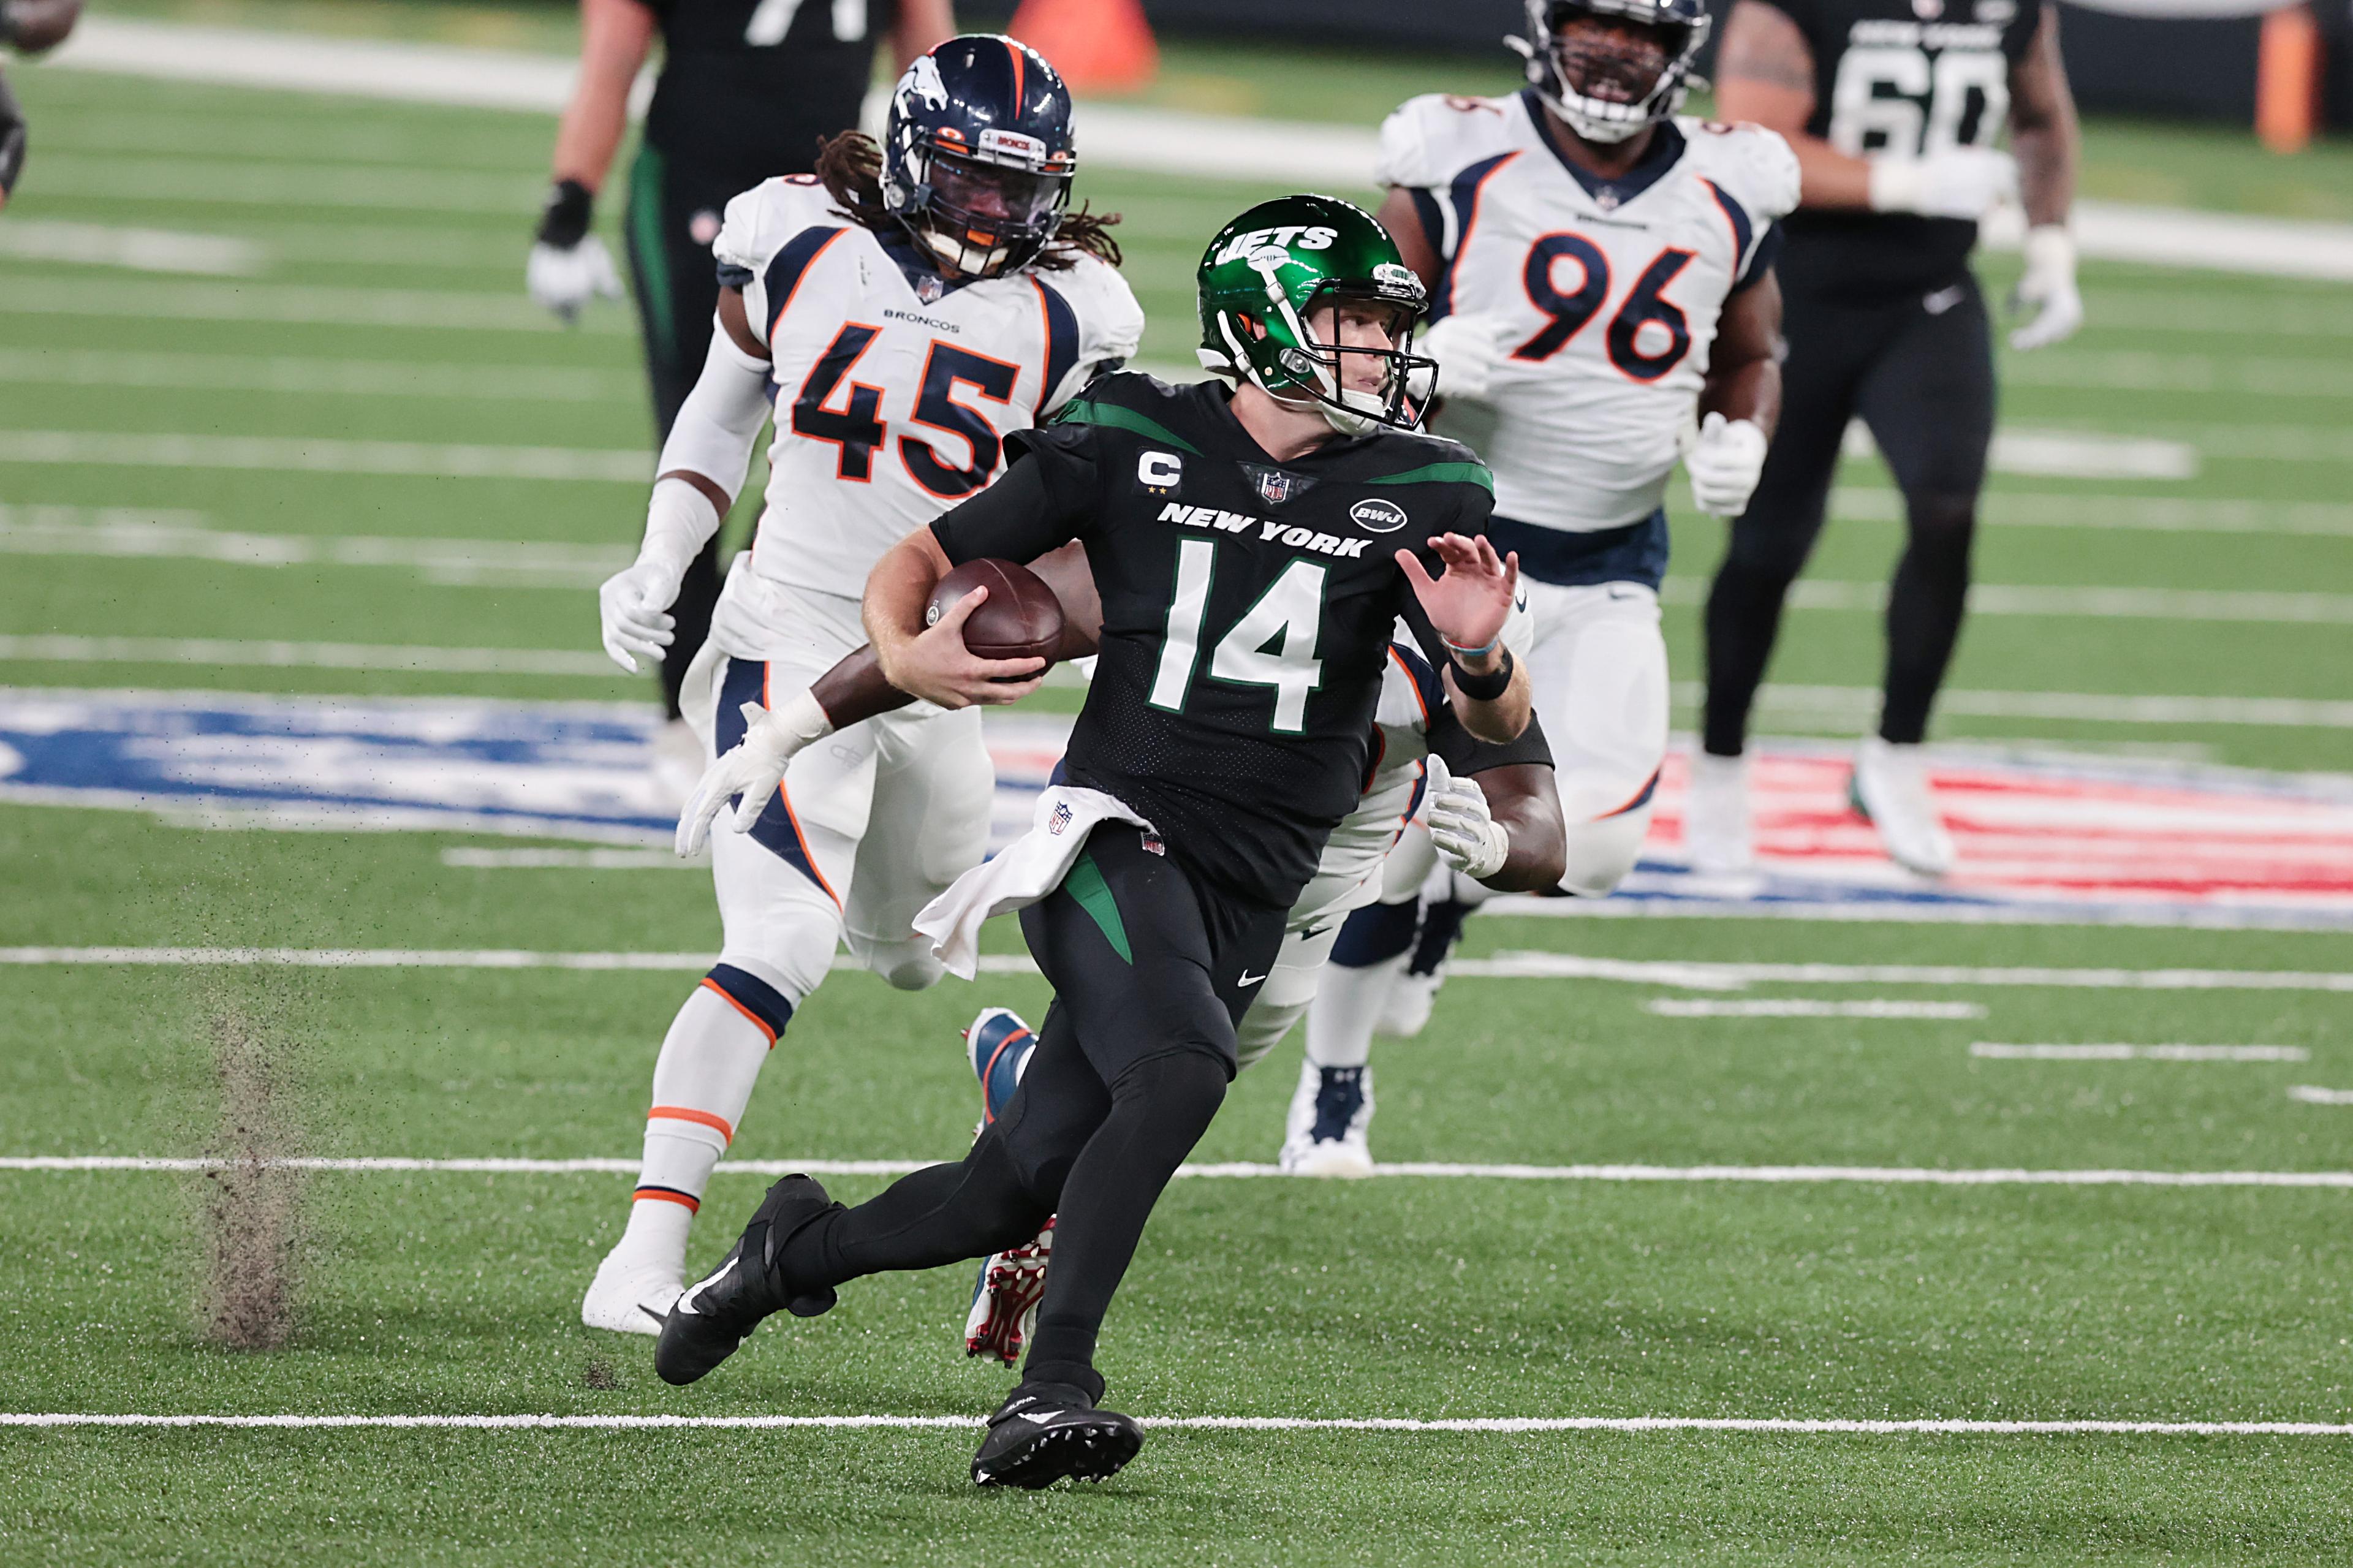 New York Jets quarterback Sam Darnold (14) breaks a tackle by Denver Broncos inside linebacker A.J. Johnson (45) for a touchdown at MetLife Stadium. / Vincent Carchietta - USA TODAY Sports